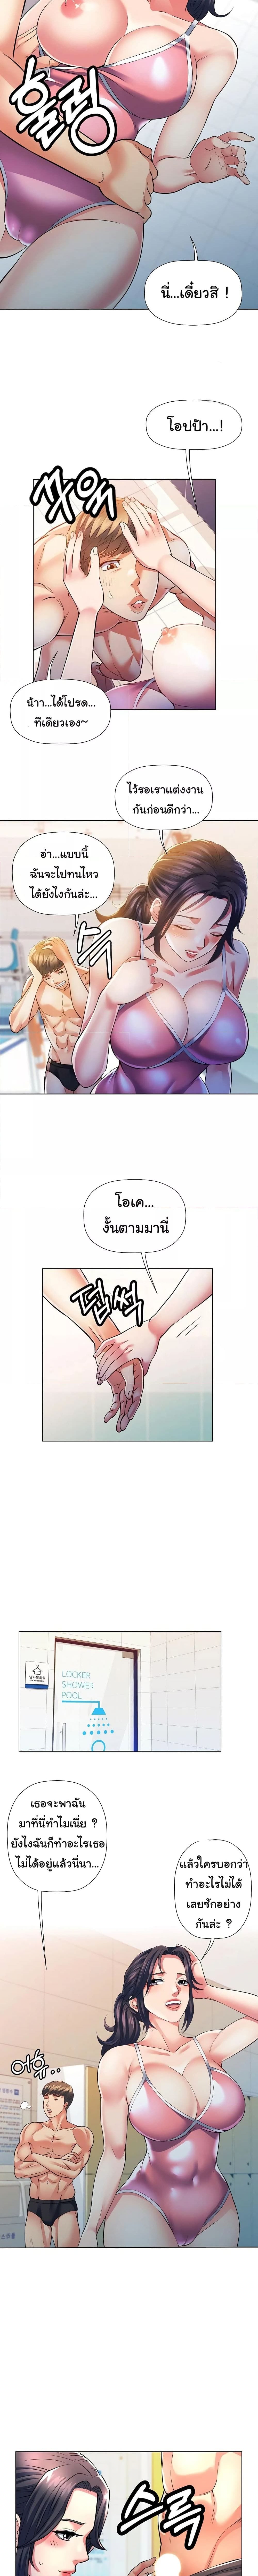 In Her Place ตอนที่ 1 ภาพ 6